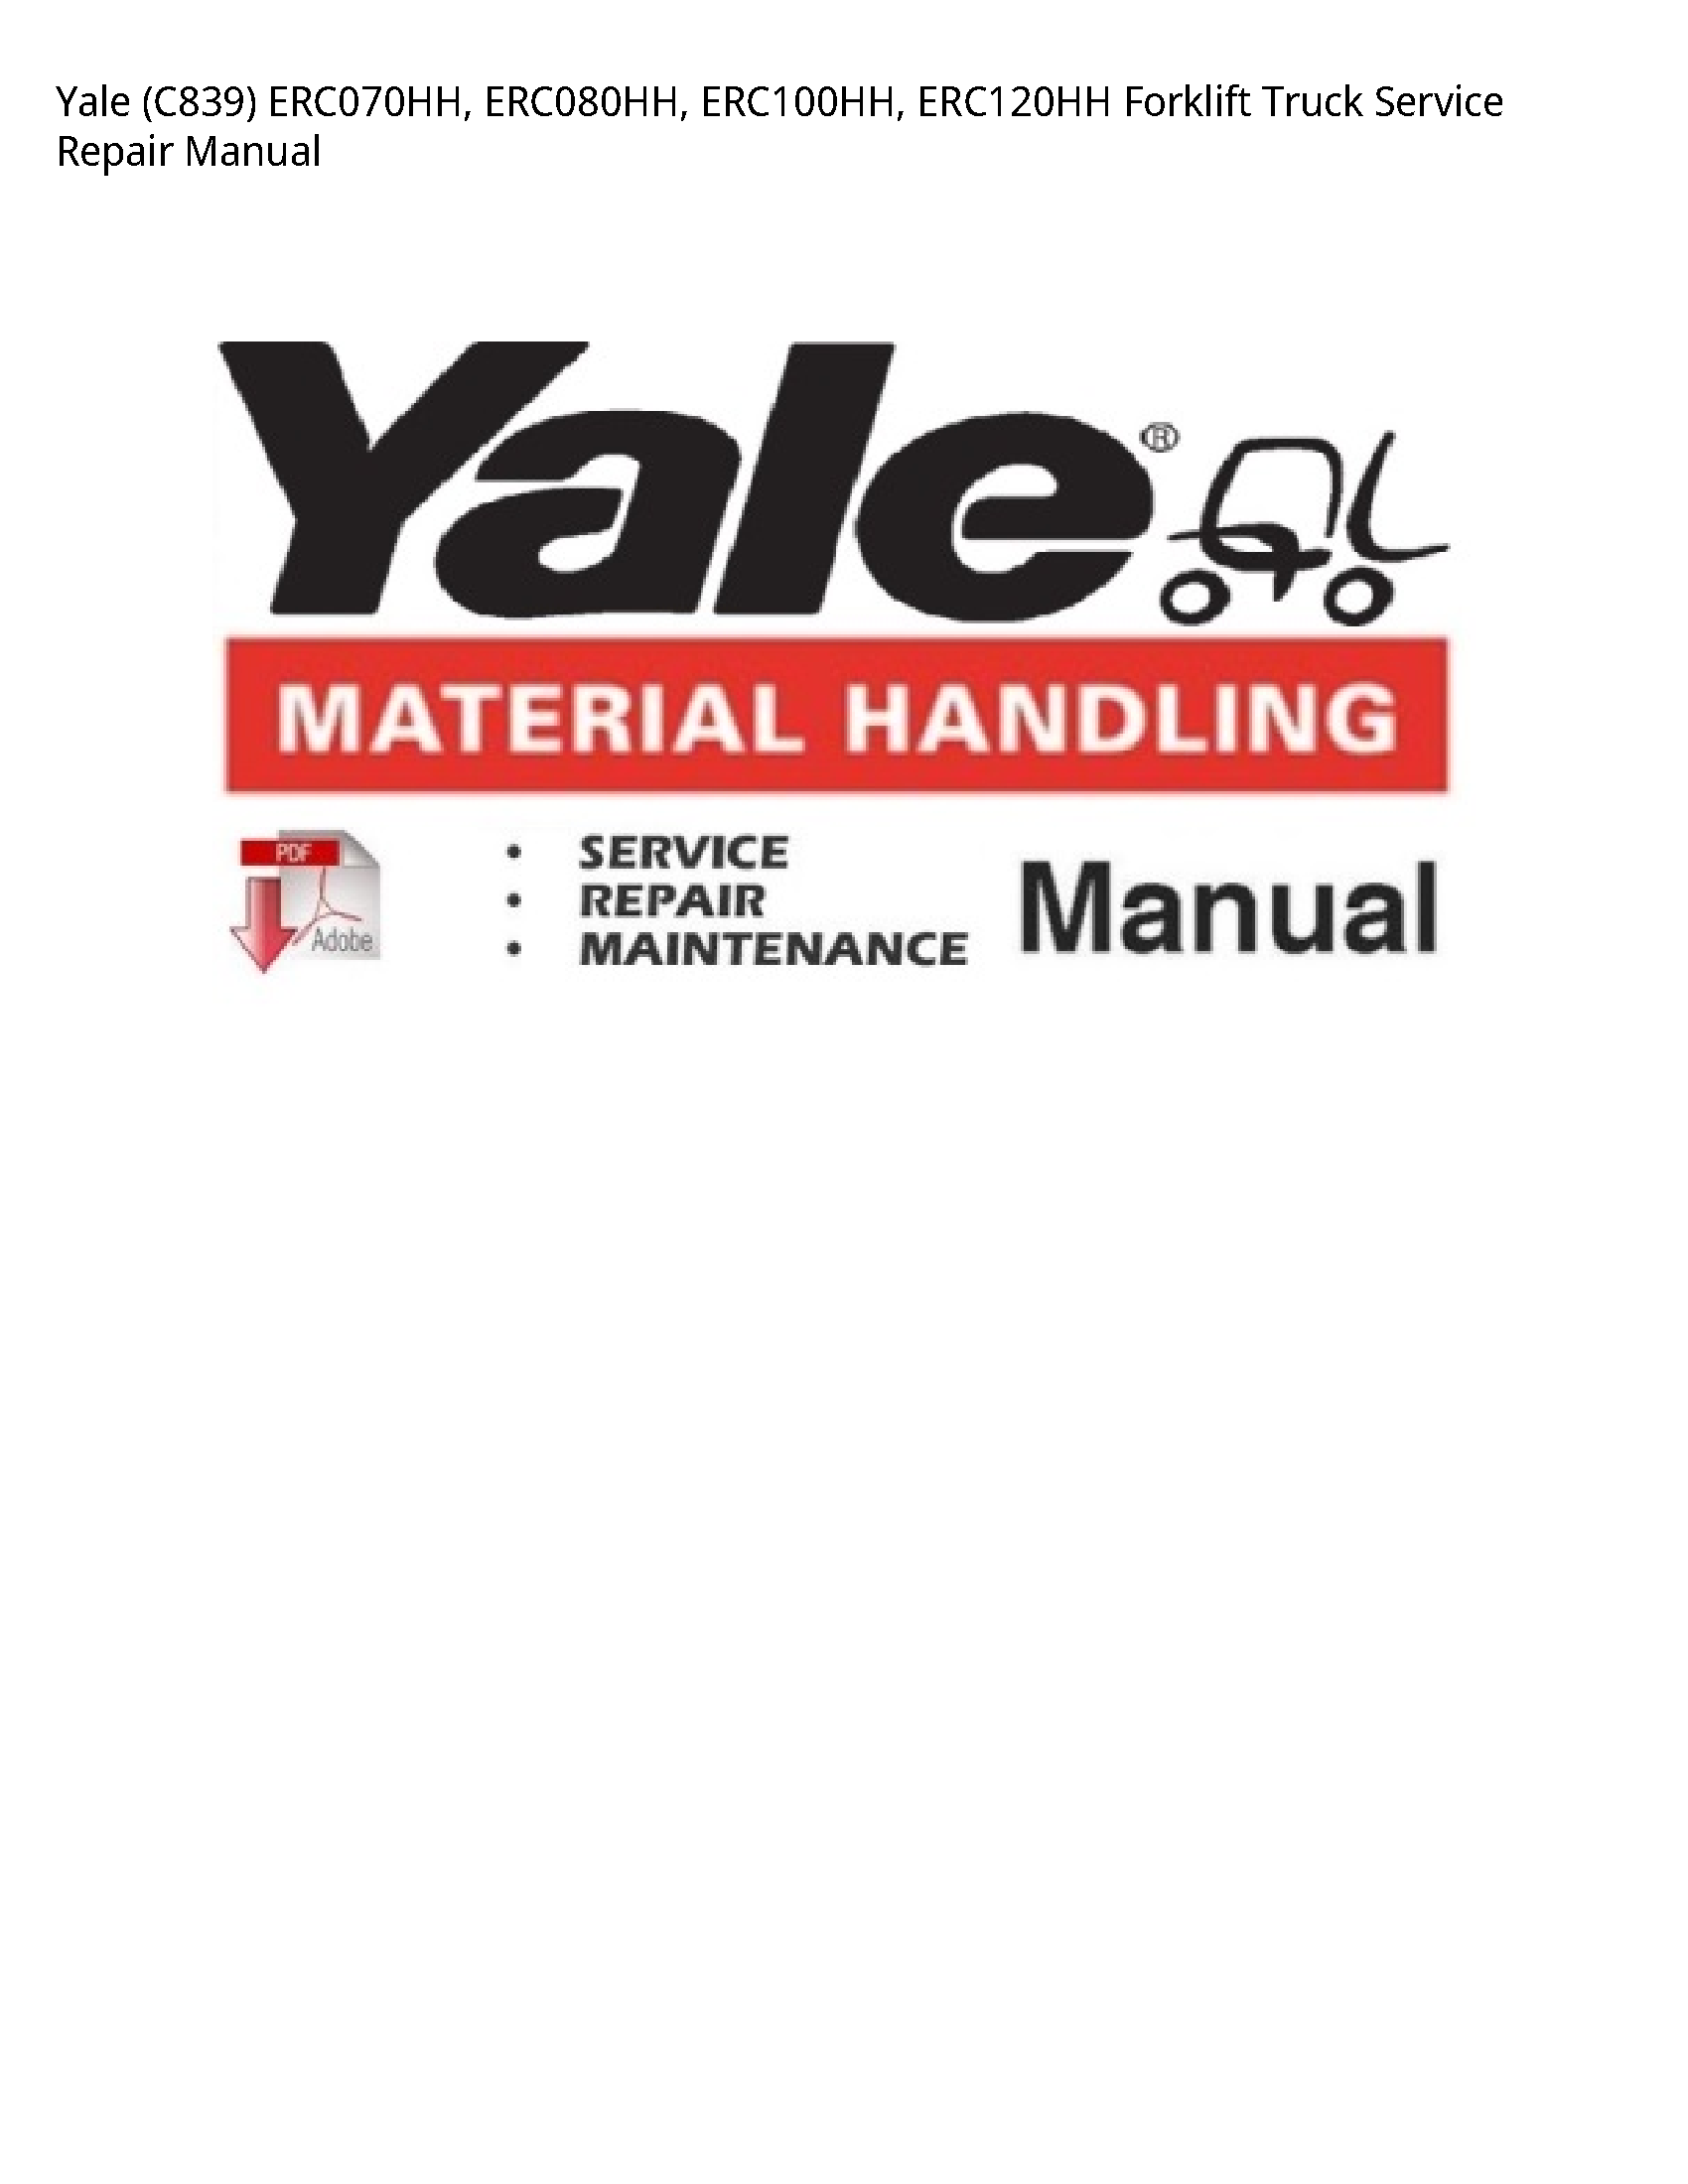 Yale (C839) Forklift Truck manual